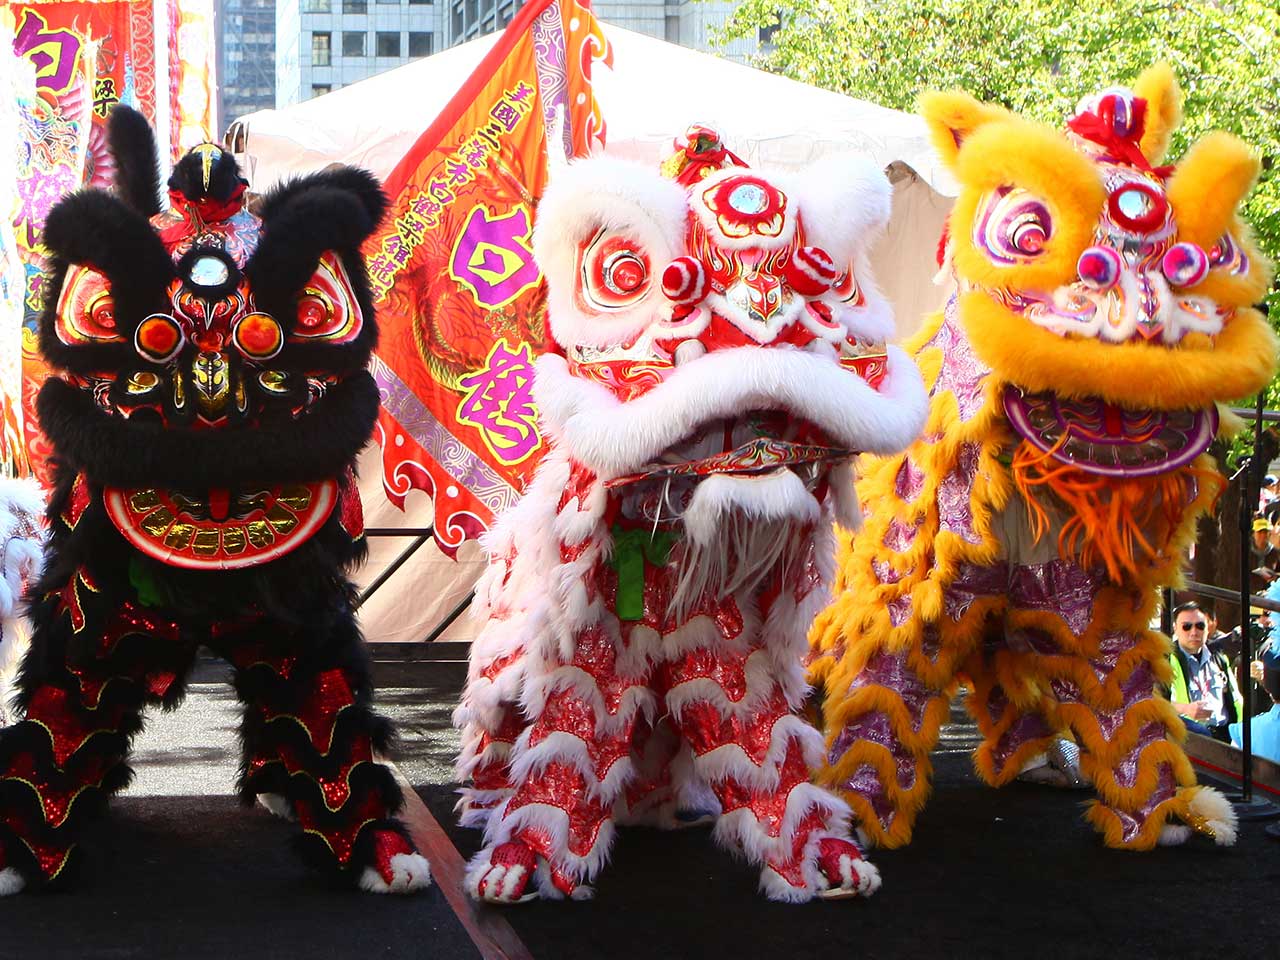 News from The Pierce - Chinese New Year: JAN 27